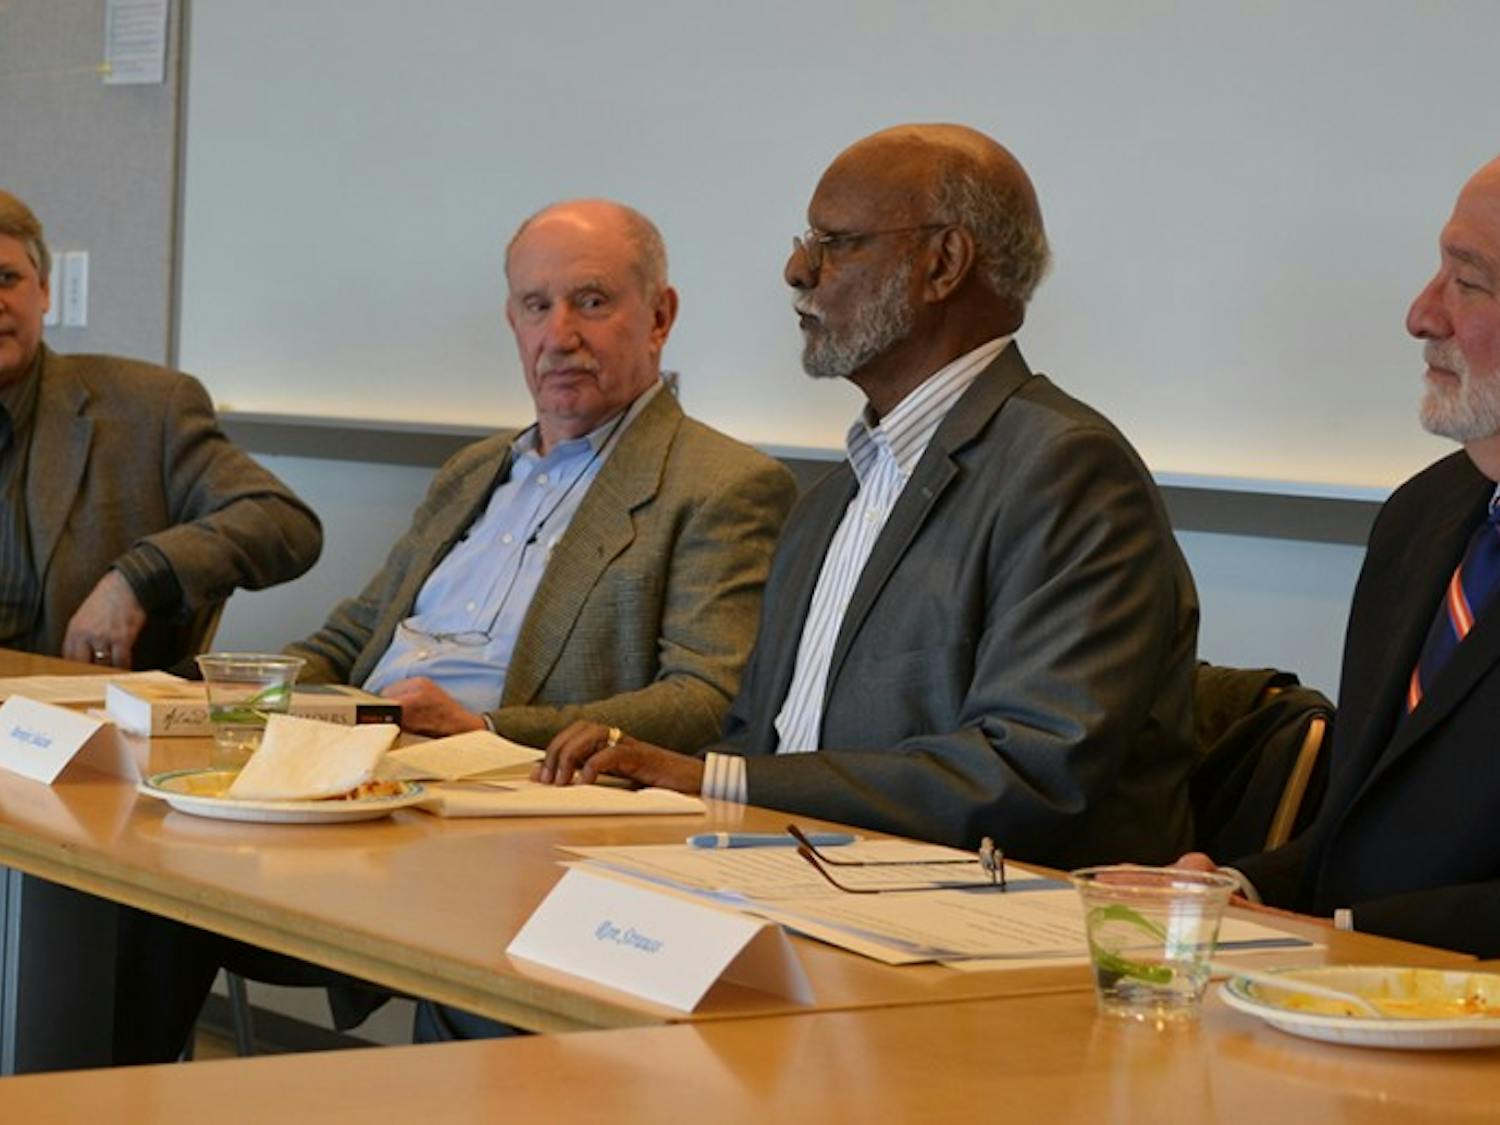 Panelists - from left to right - Michael Lambert, Ken Brown, Bereket Selassie, and Ron Strauss, talk at the First Installment of the Nelson Mandela Lunch Panel Discussion on Monday afternoon in the Fed Ex Global Center.